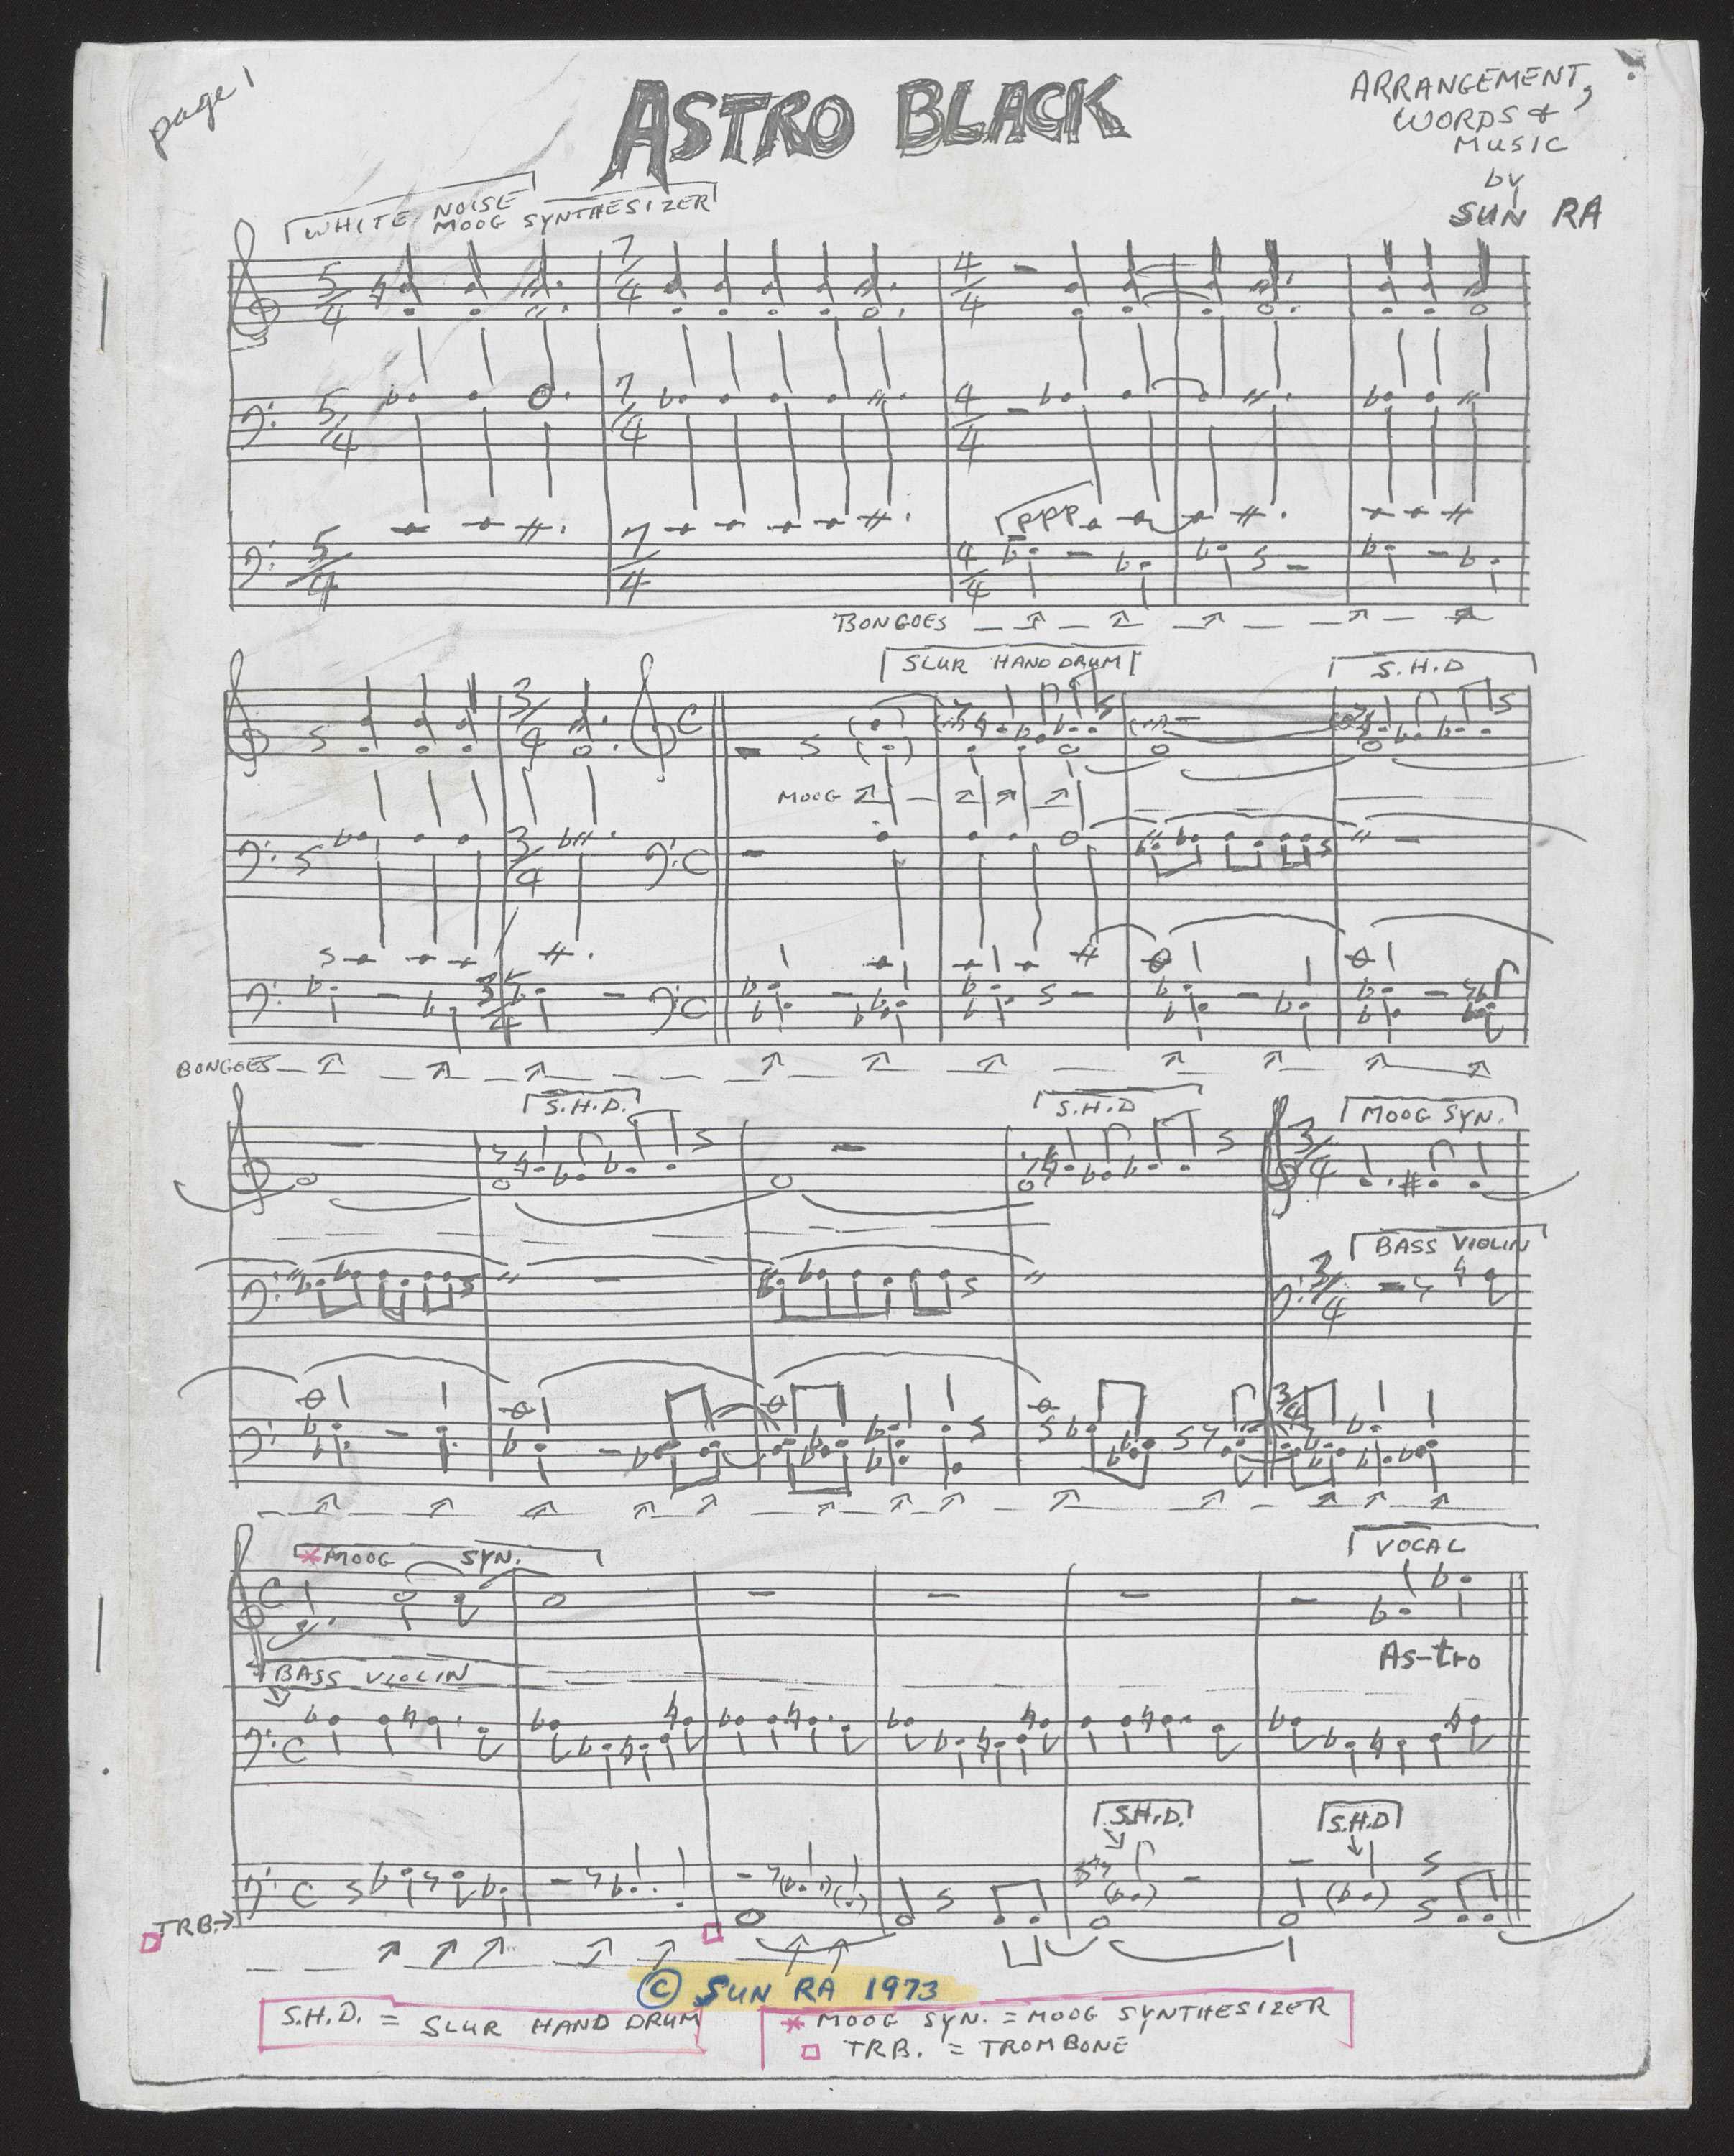 The music sheet for “Astro Black”. Hand drawn, the title of “Astro Black” is written on top of the page.